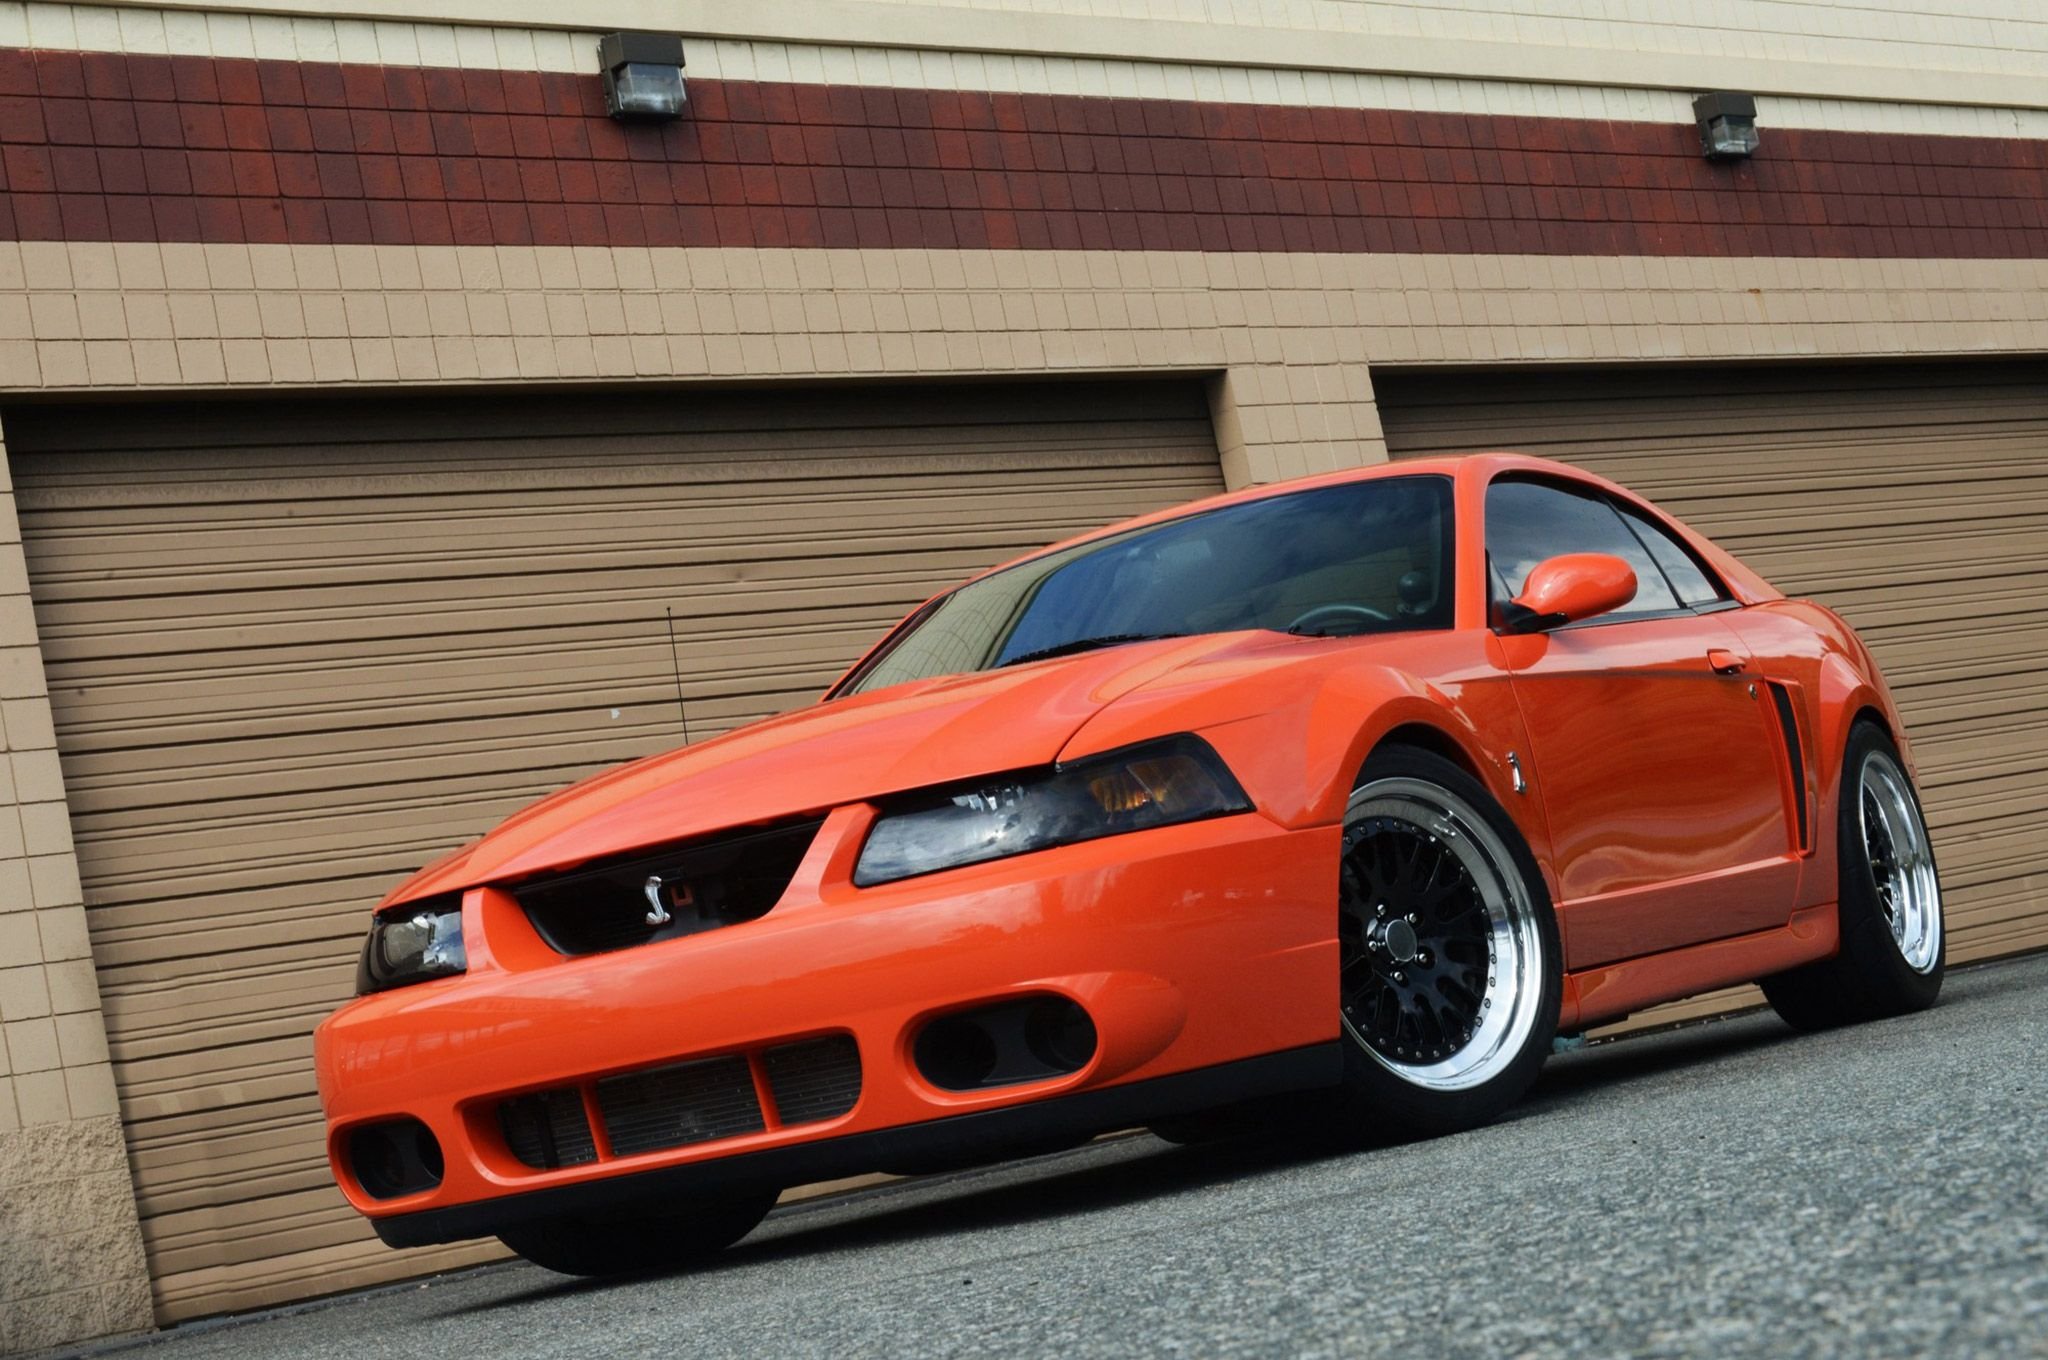 2004, Ford, Mustang, Gt, Cobra, Competition, Super, Street, Pro, Touring, Usa,  09 Wallpaper